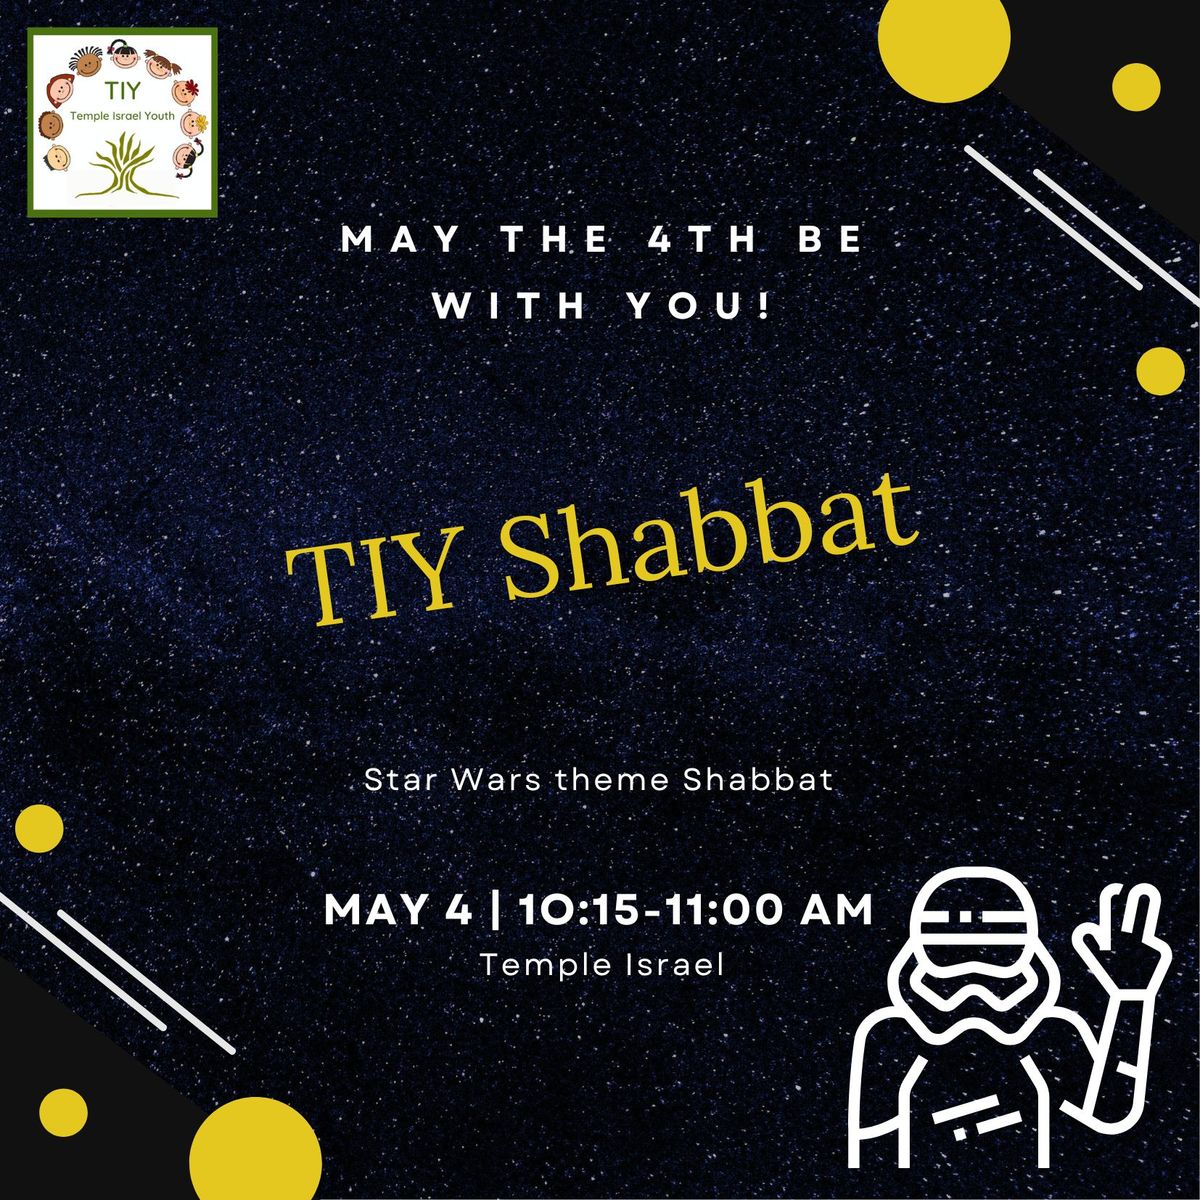 TIY Shabbat - May the 4th Be With You